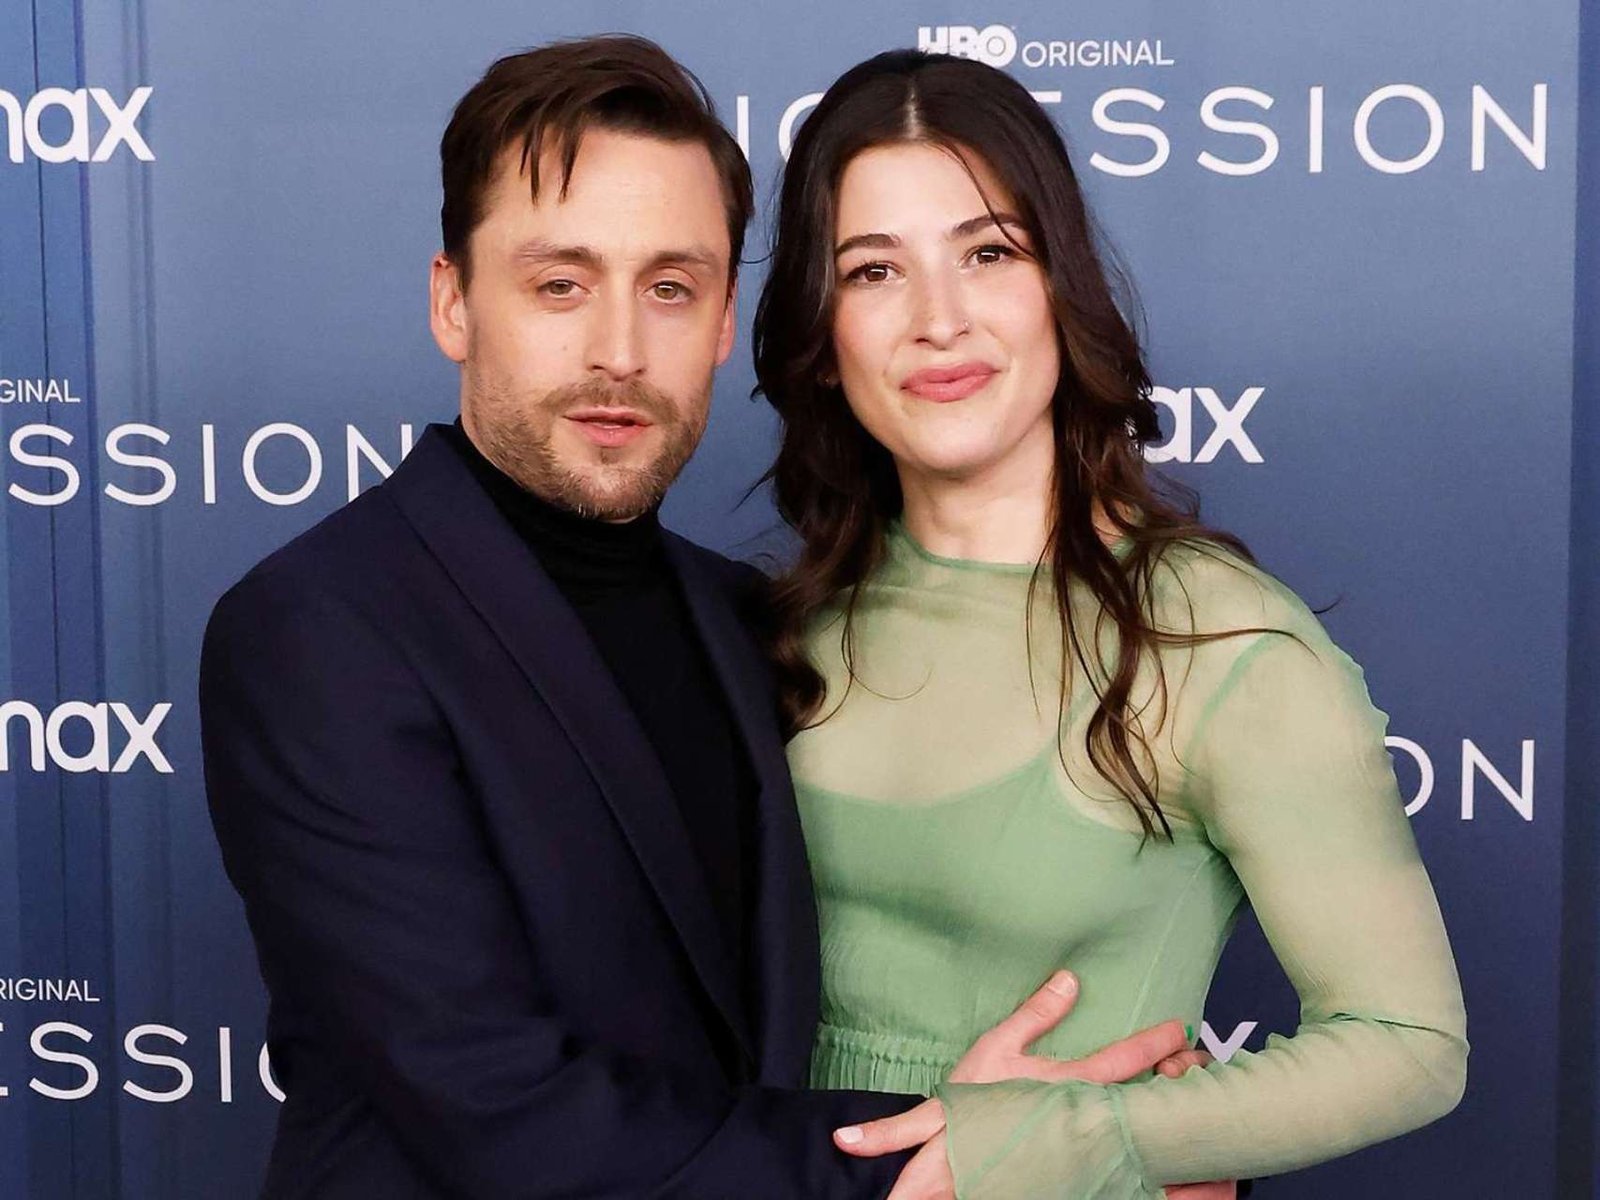 In the Latest News Kieran Culkin openly revealed his desires in public while accepting the award for Outstanding Lead Actor in a Drama Series